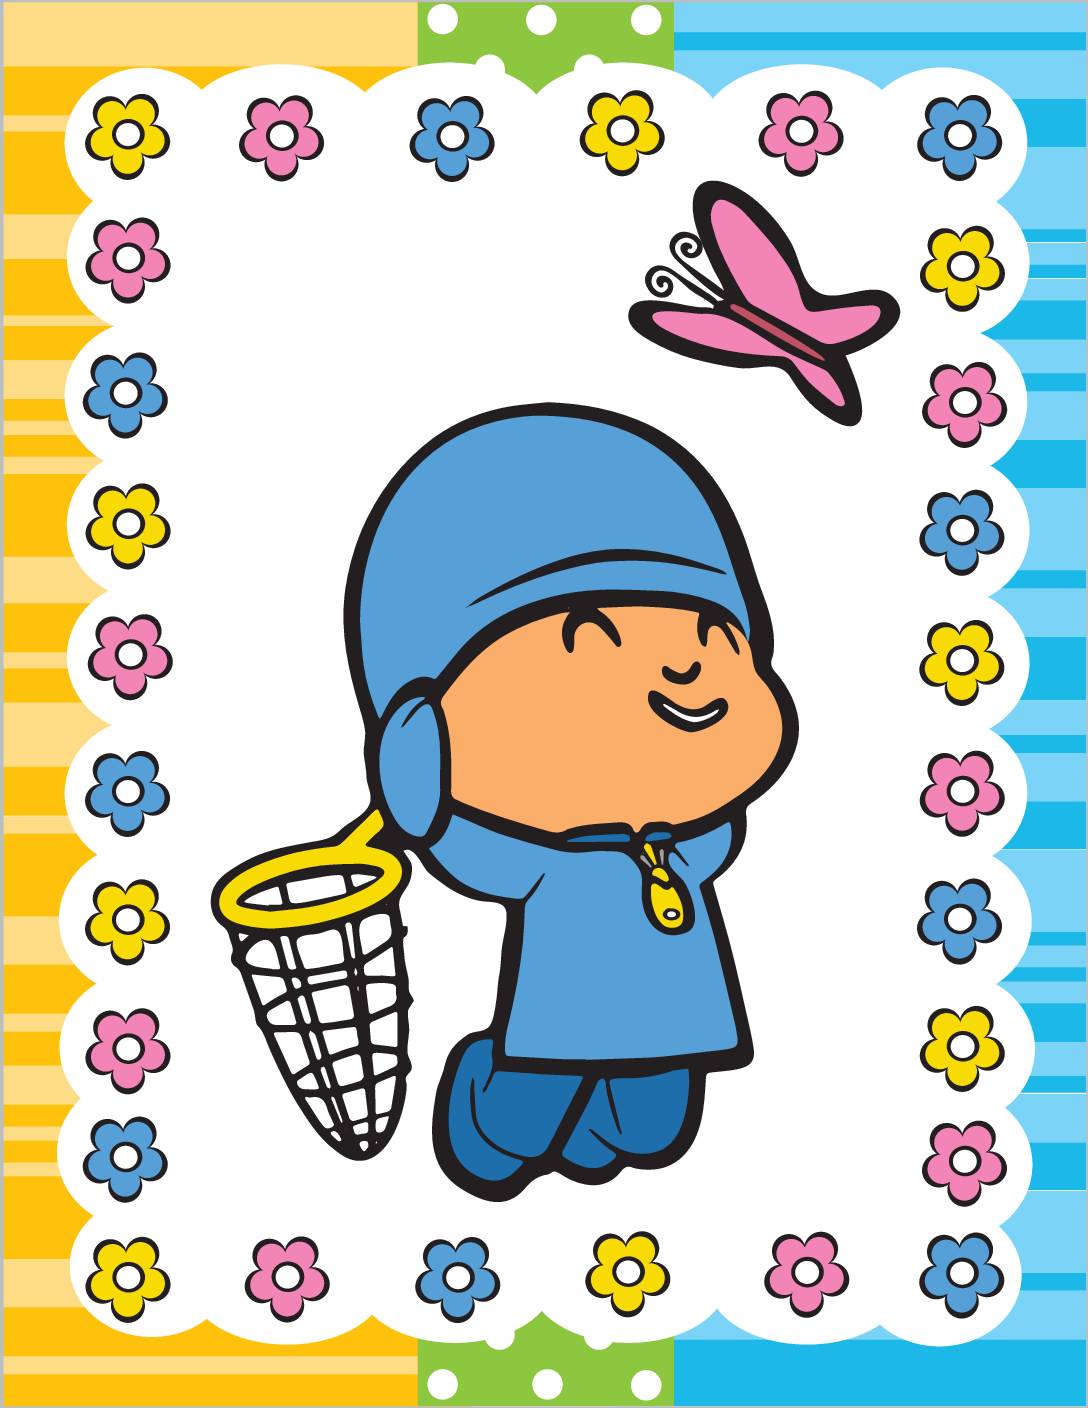 Wall Picture 2 Pocoyo